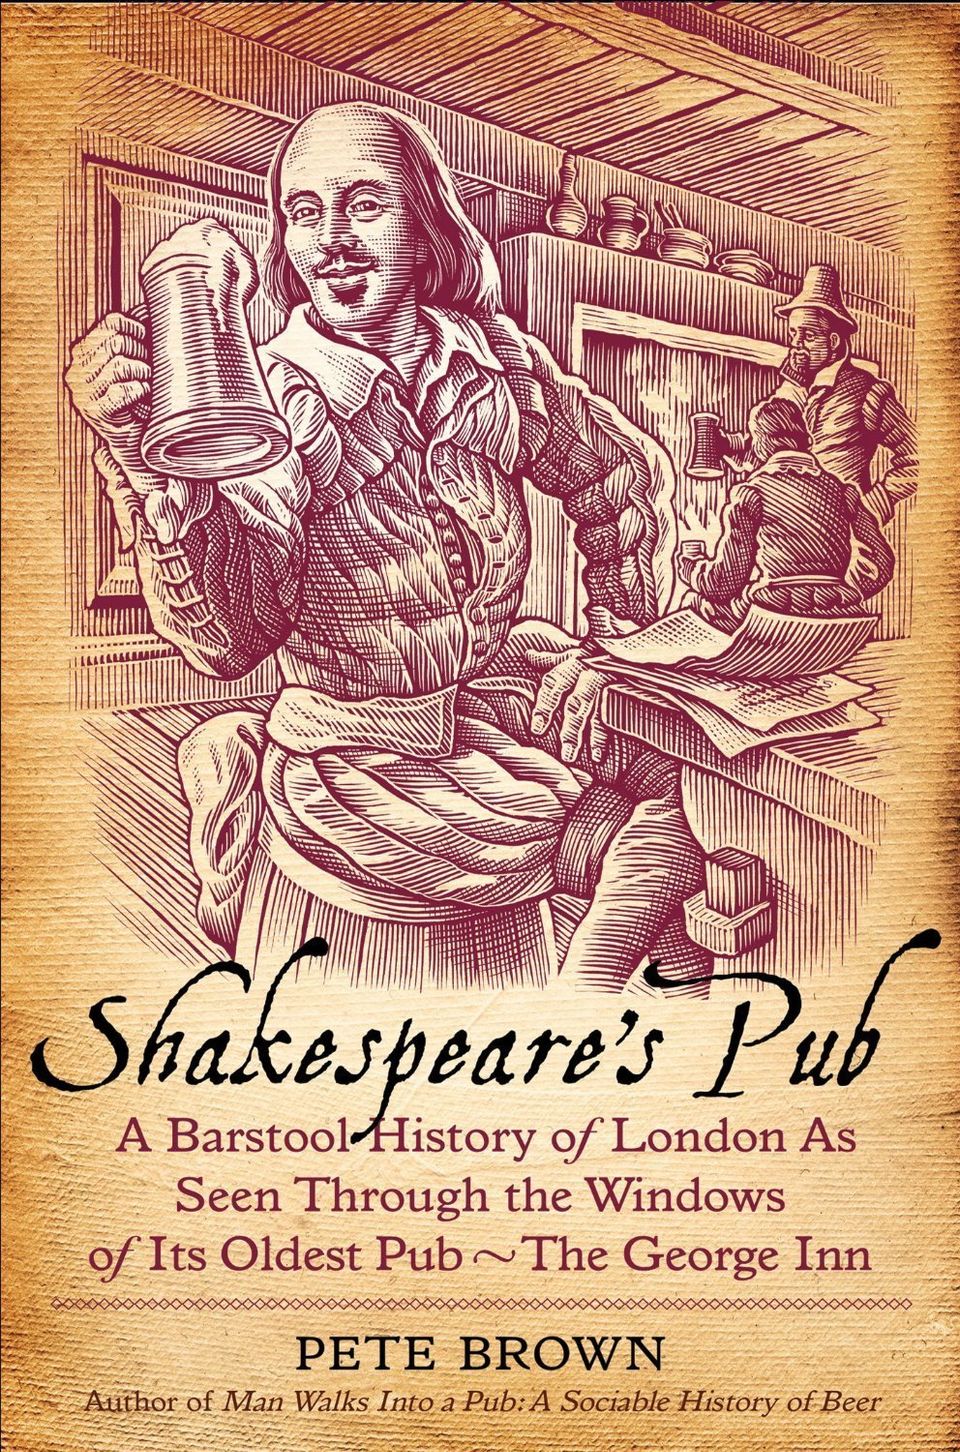 Shakespeare’s Pub: A Barstool History of London as Seen Through the Windows of Its Oldest Pub—The George Inn by Pete Brown (St. Martin’s) 